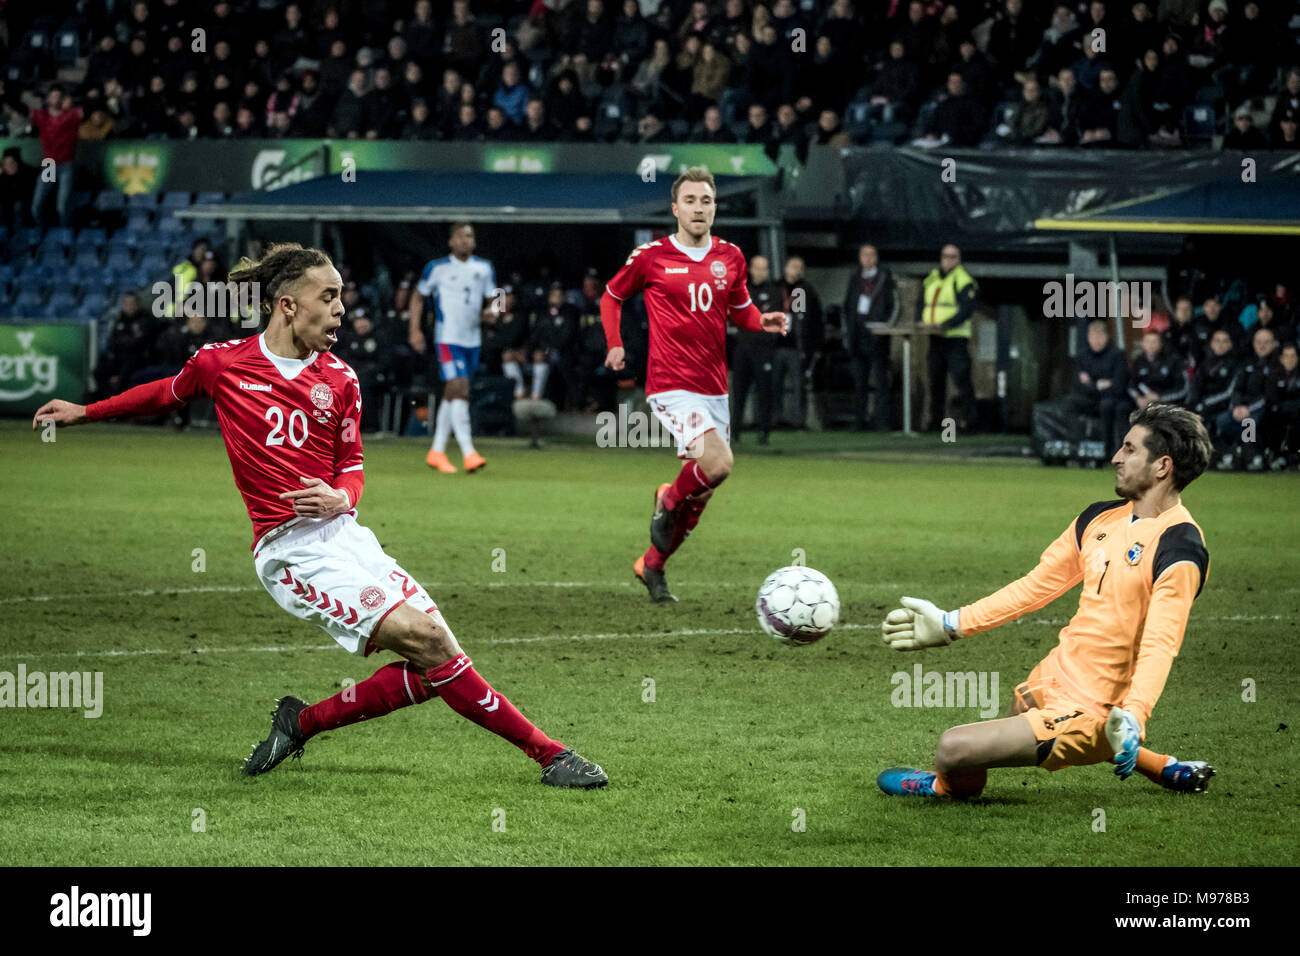 Denmark, Brøndby - March 22, 2018. Yussuf Poulsen (20) of Denmark seen against Panama goalkeeper Jaime Penedo (1) during the football friendly between Denmark and Panama at Brøndby Stadion. (Photo credit: Gonzales Photo - Kim M. Leland). Credit: Gonzales Photo/Alamy Live News Stock Photo